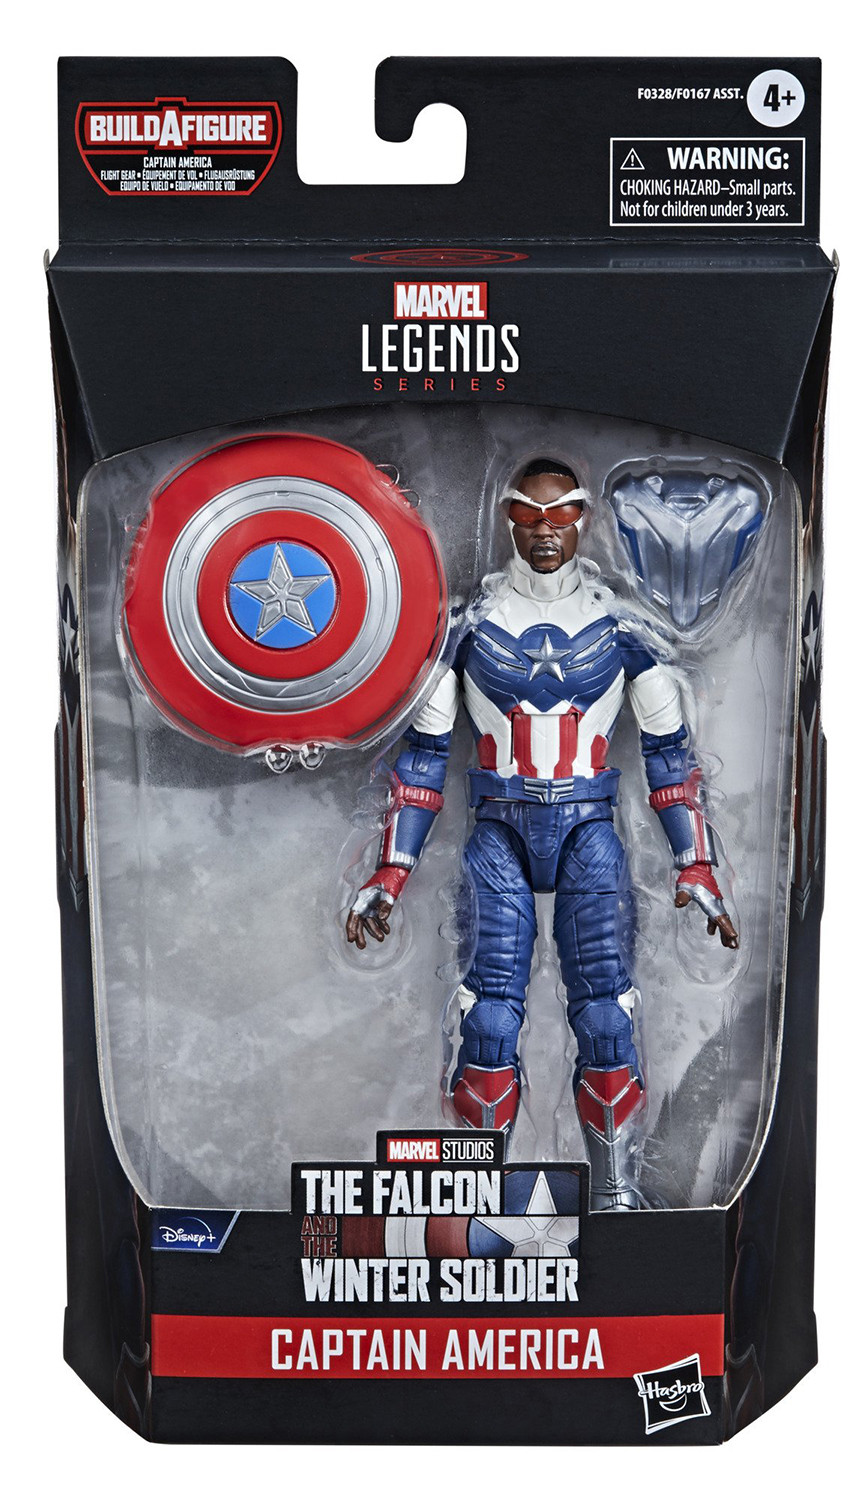  Marvel Legends Series: The Falcon And The Winter Solider  Captain America (15 )